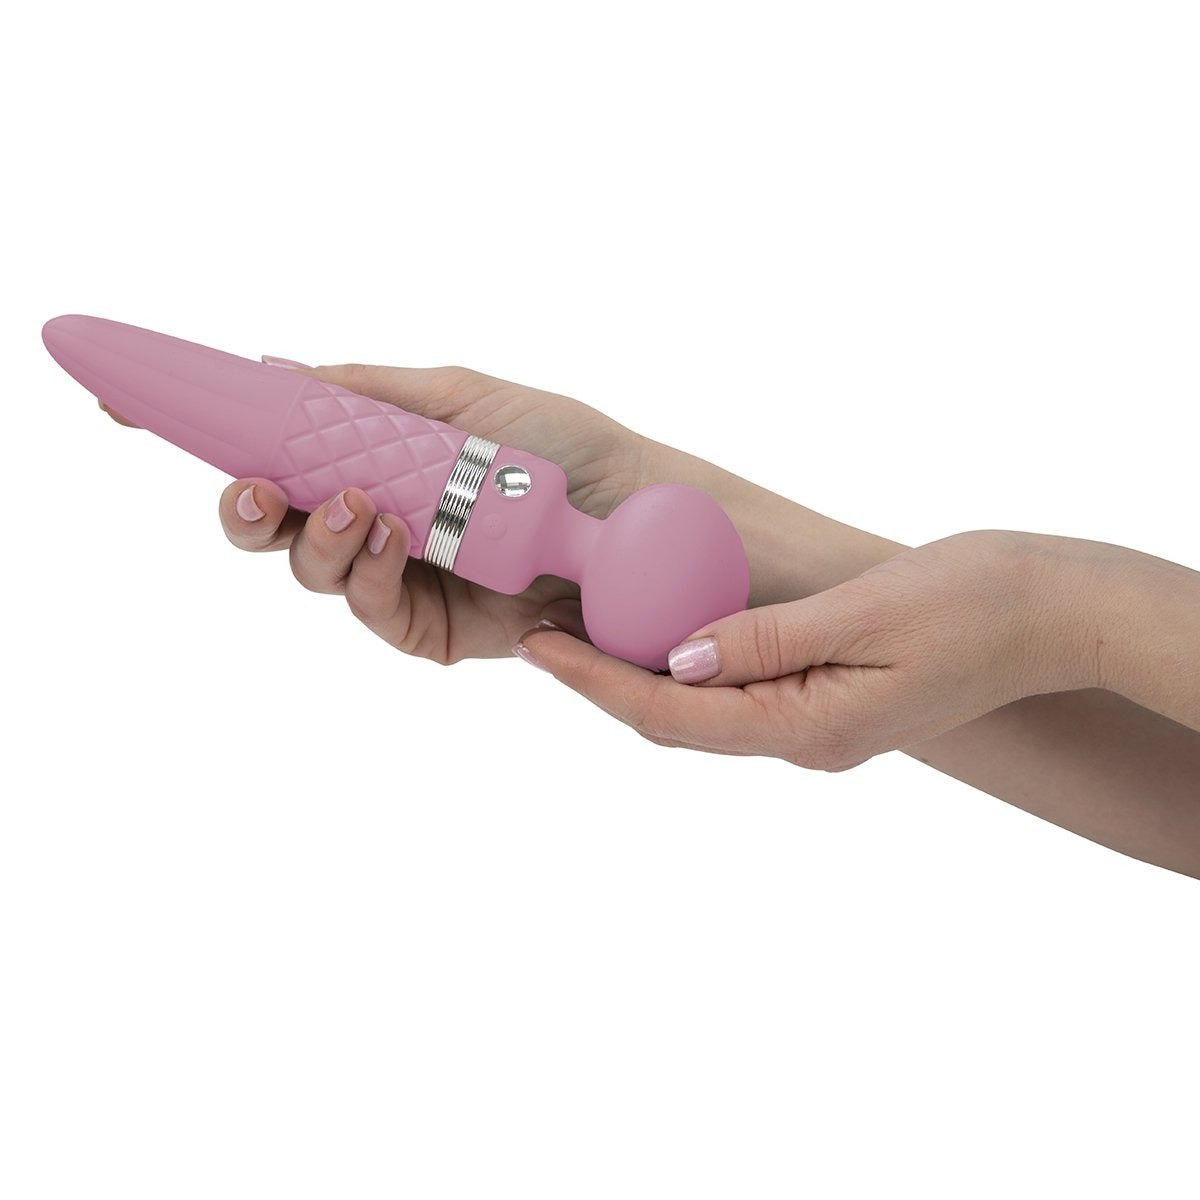 Pillow Talk Sultry Wand - Buy At Luxury Toy X - Free 3-Day Shipping